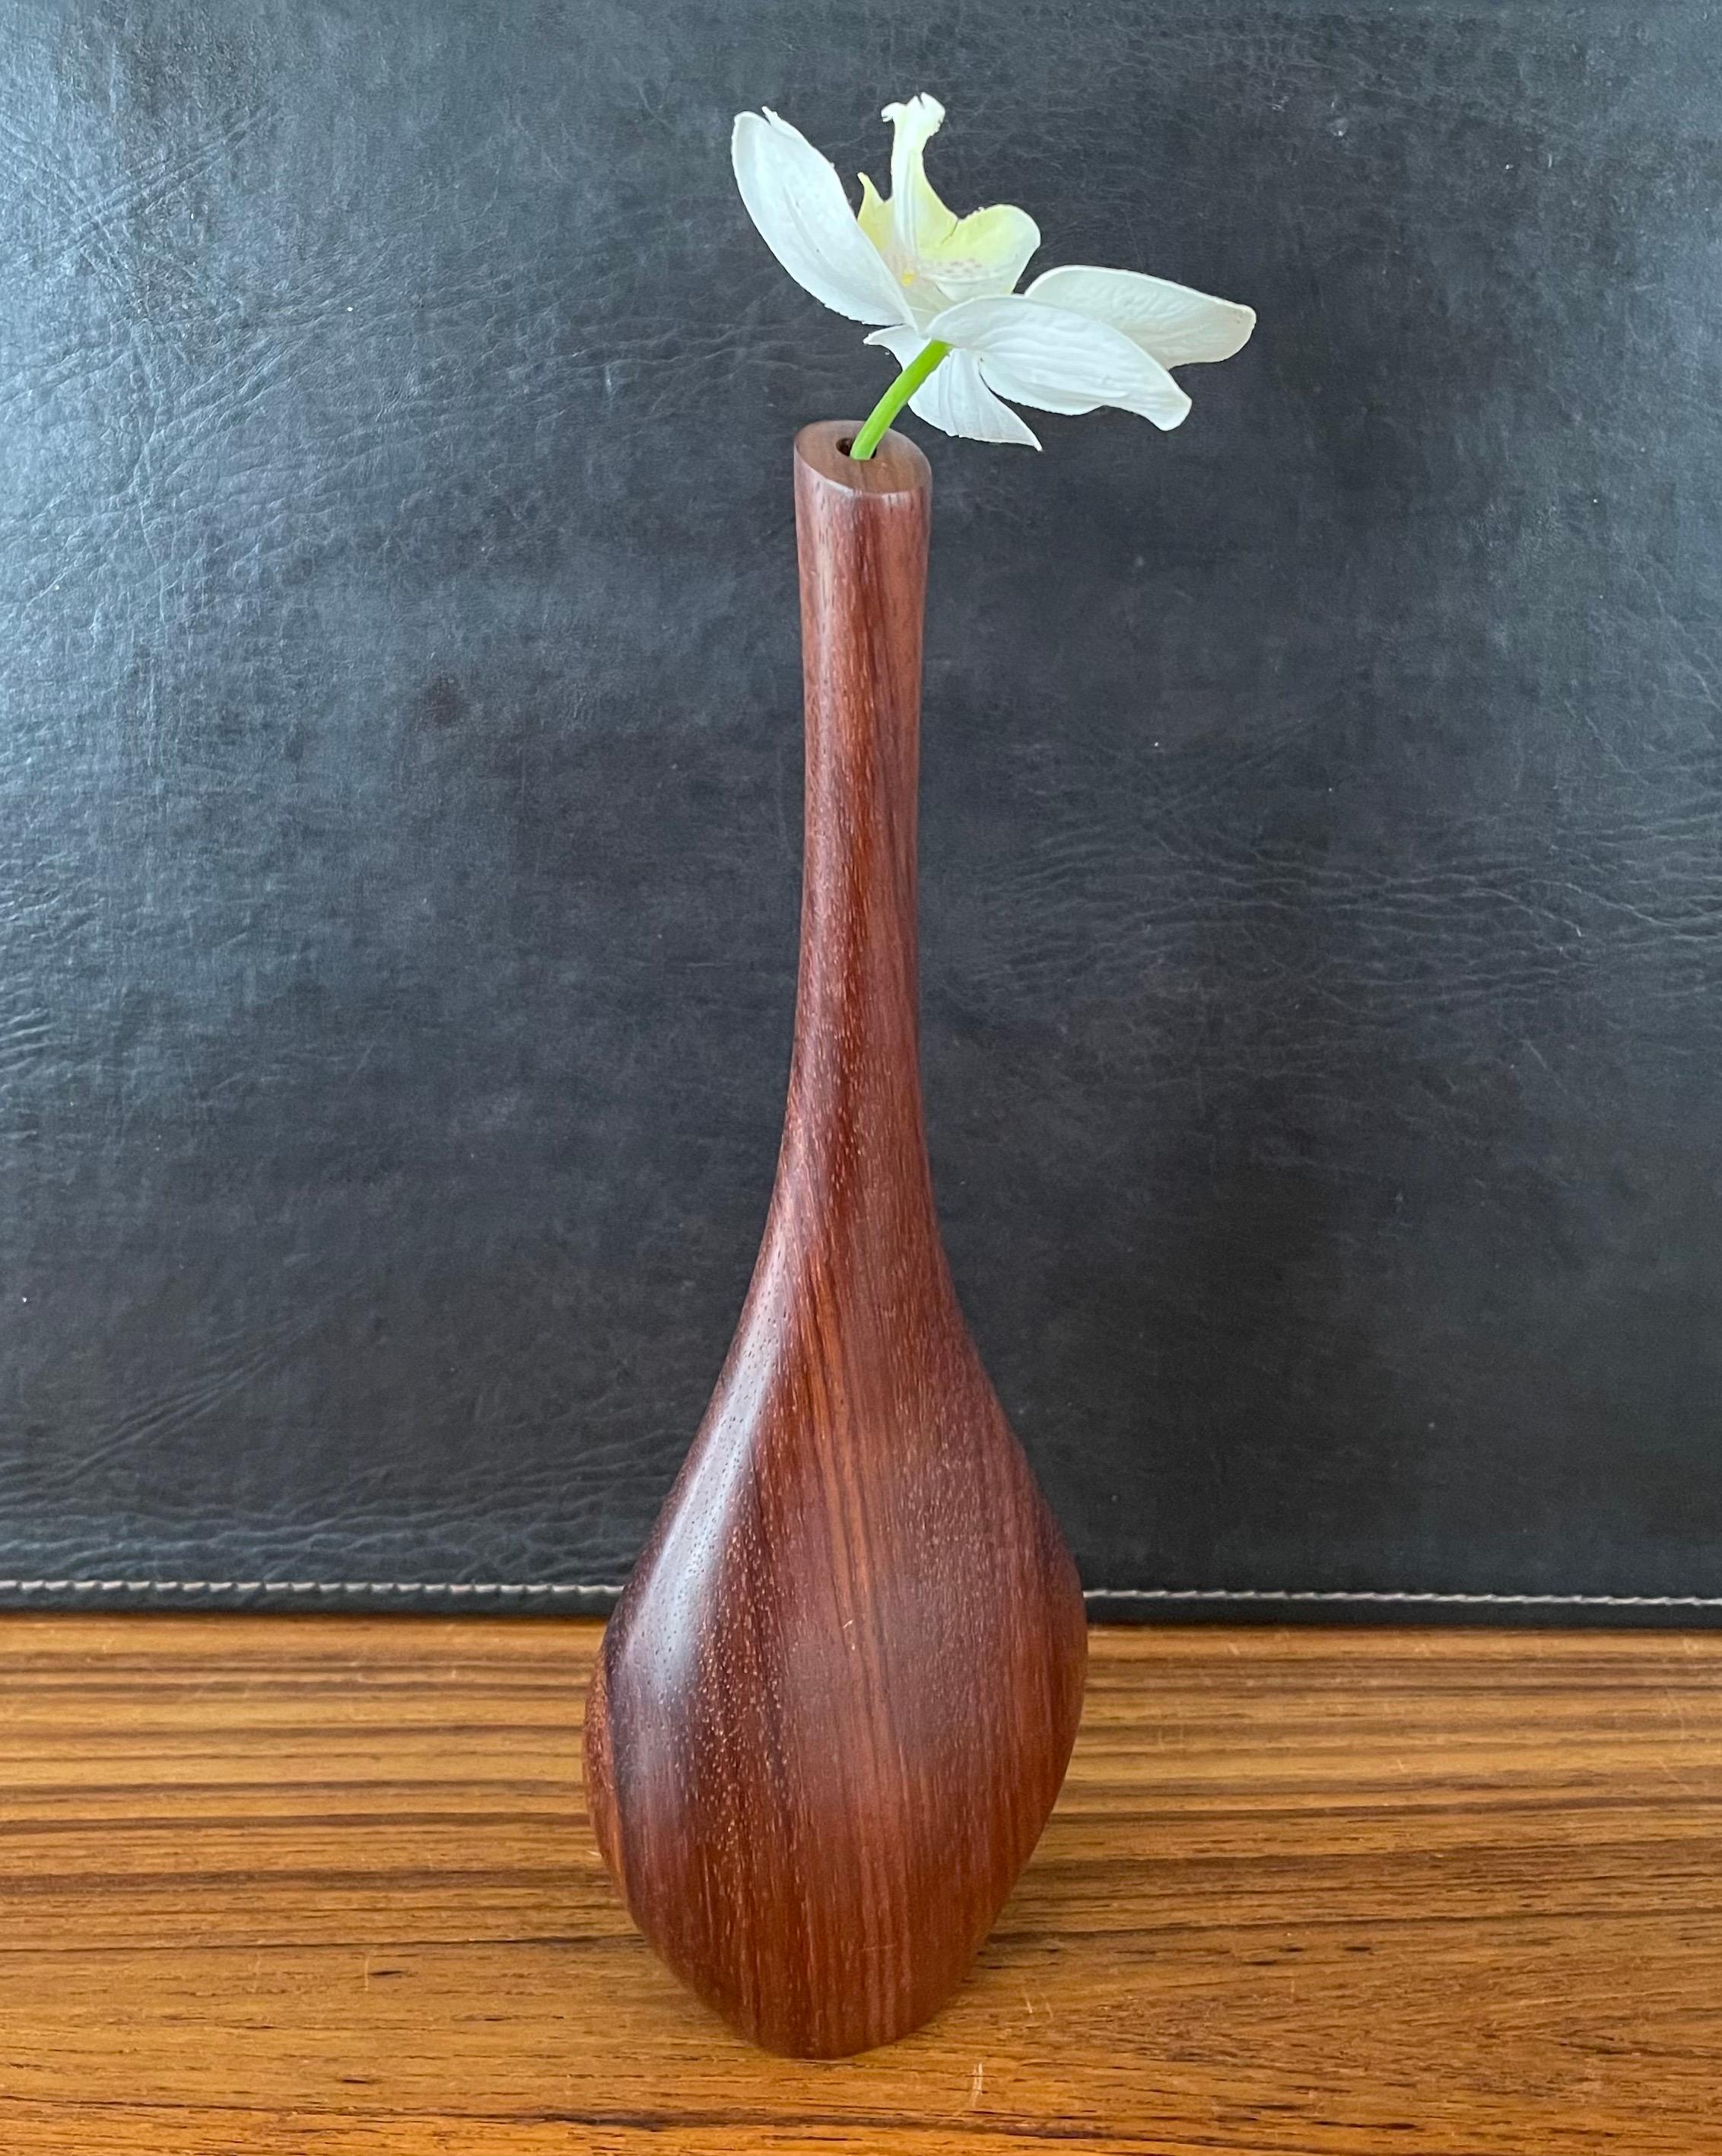 Modernist solid walnut vase, circa 1970s. The piece is in great condition, has wonderful lines and measures: 4